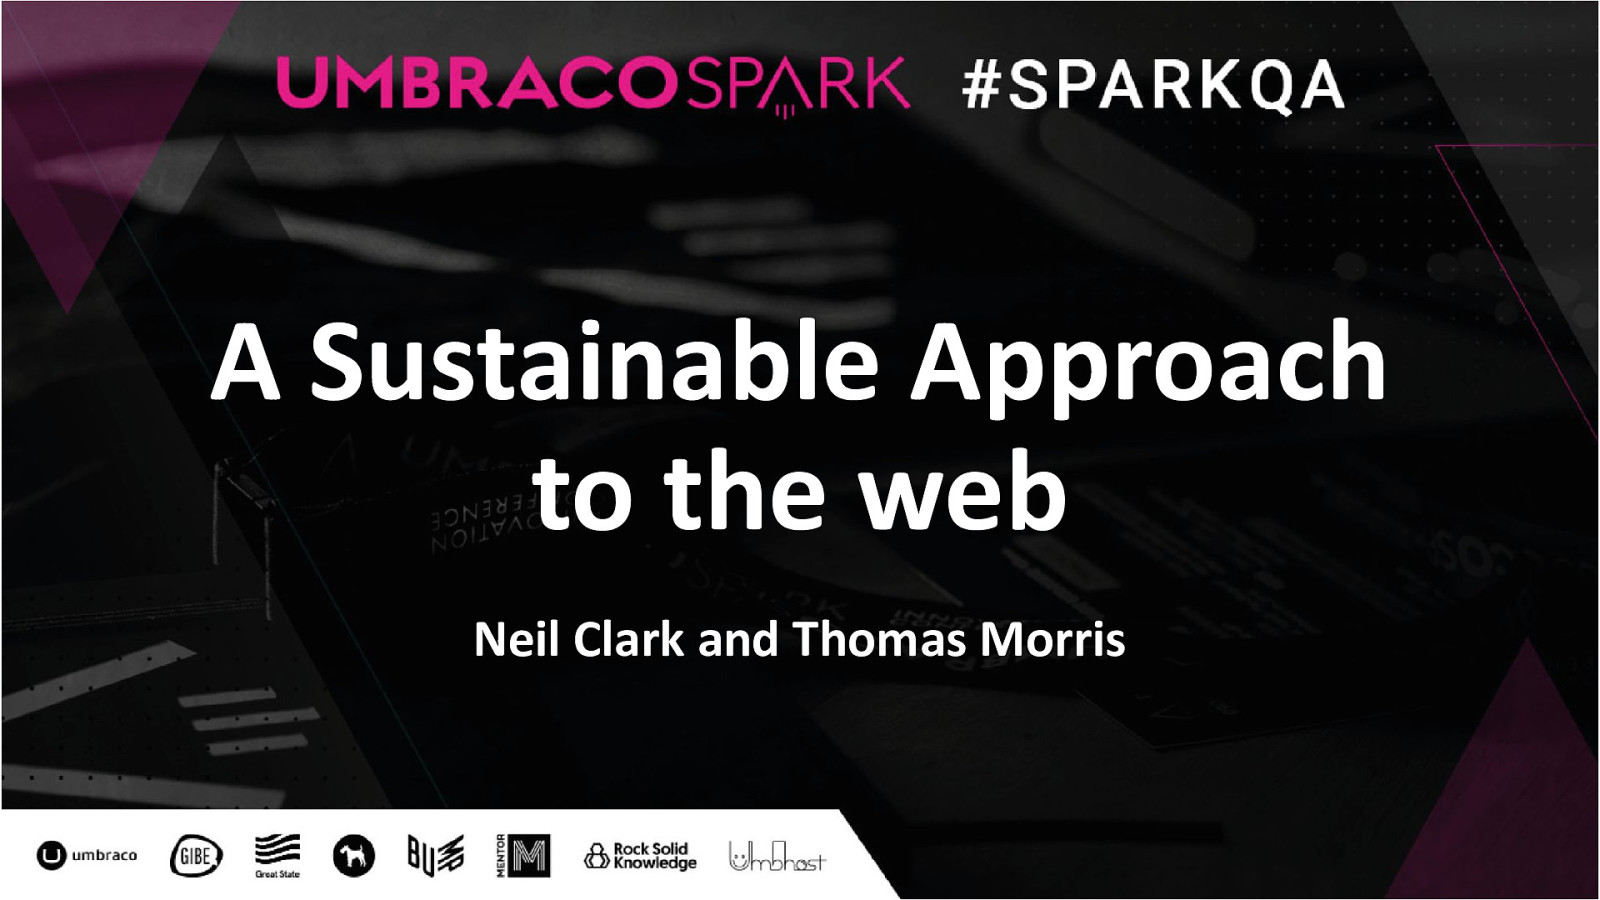 A sustainable approach to the web